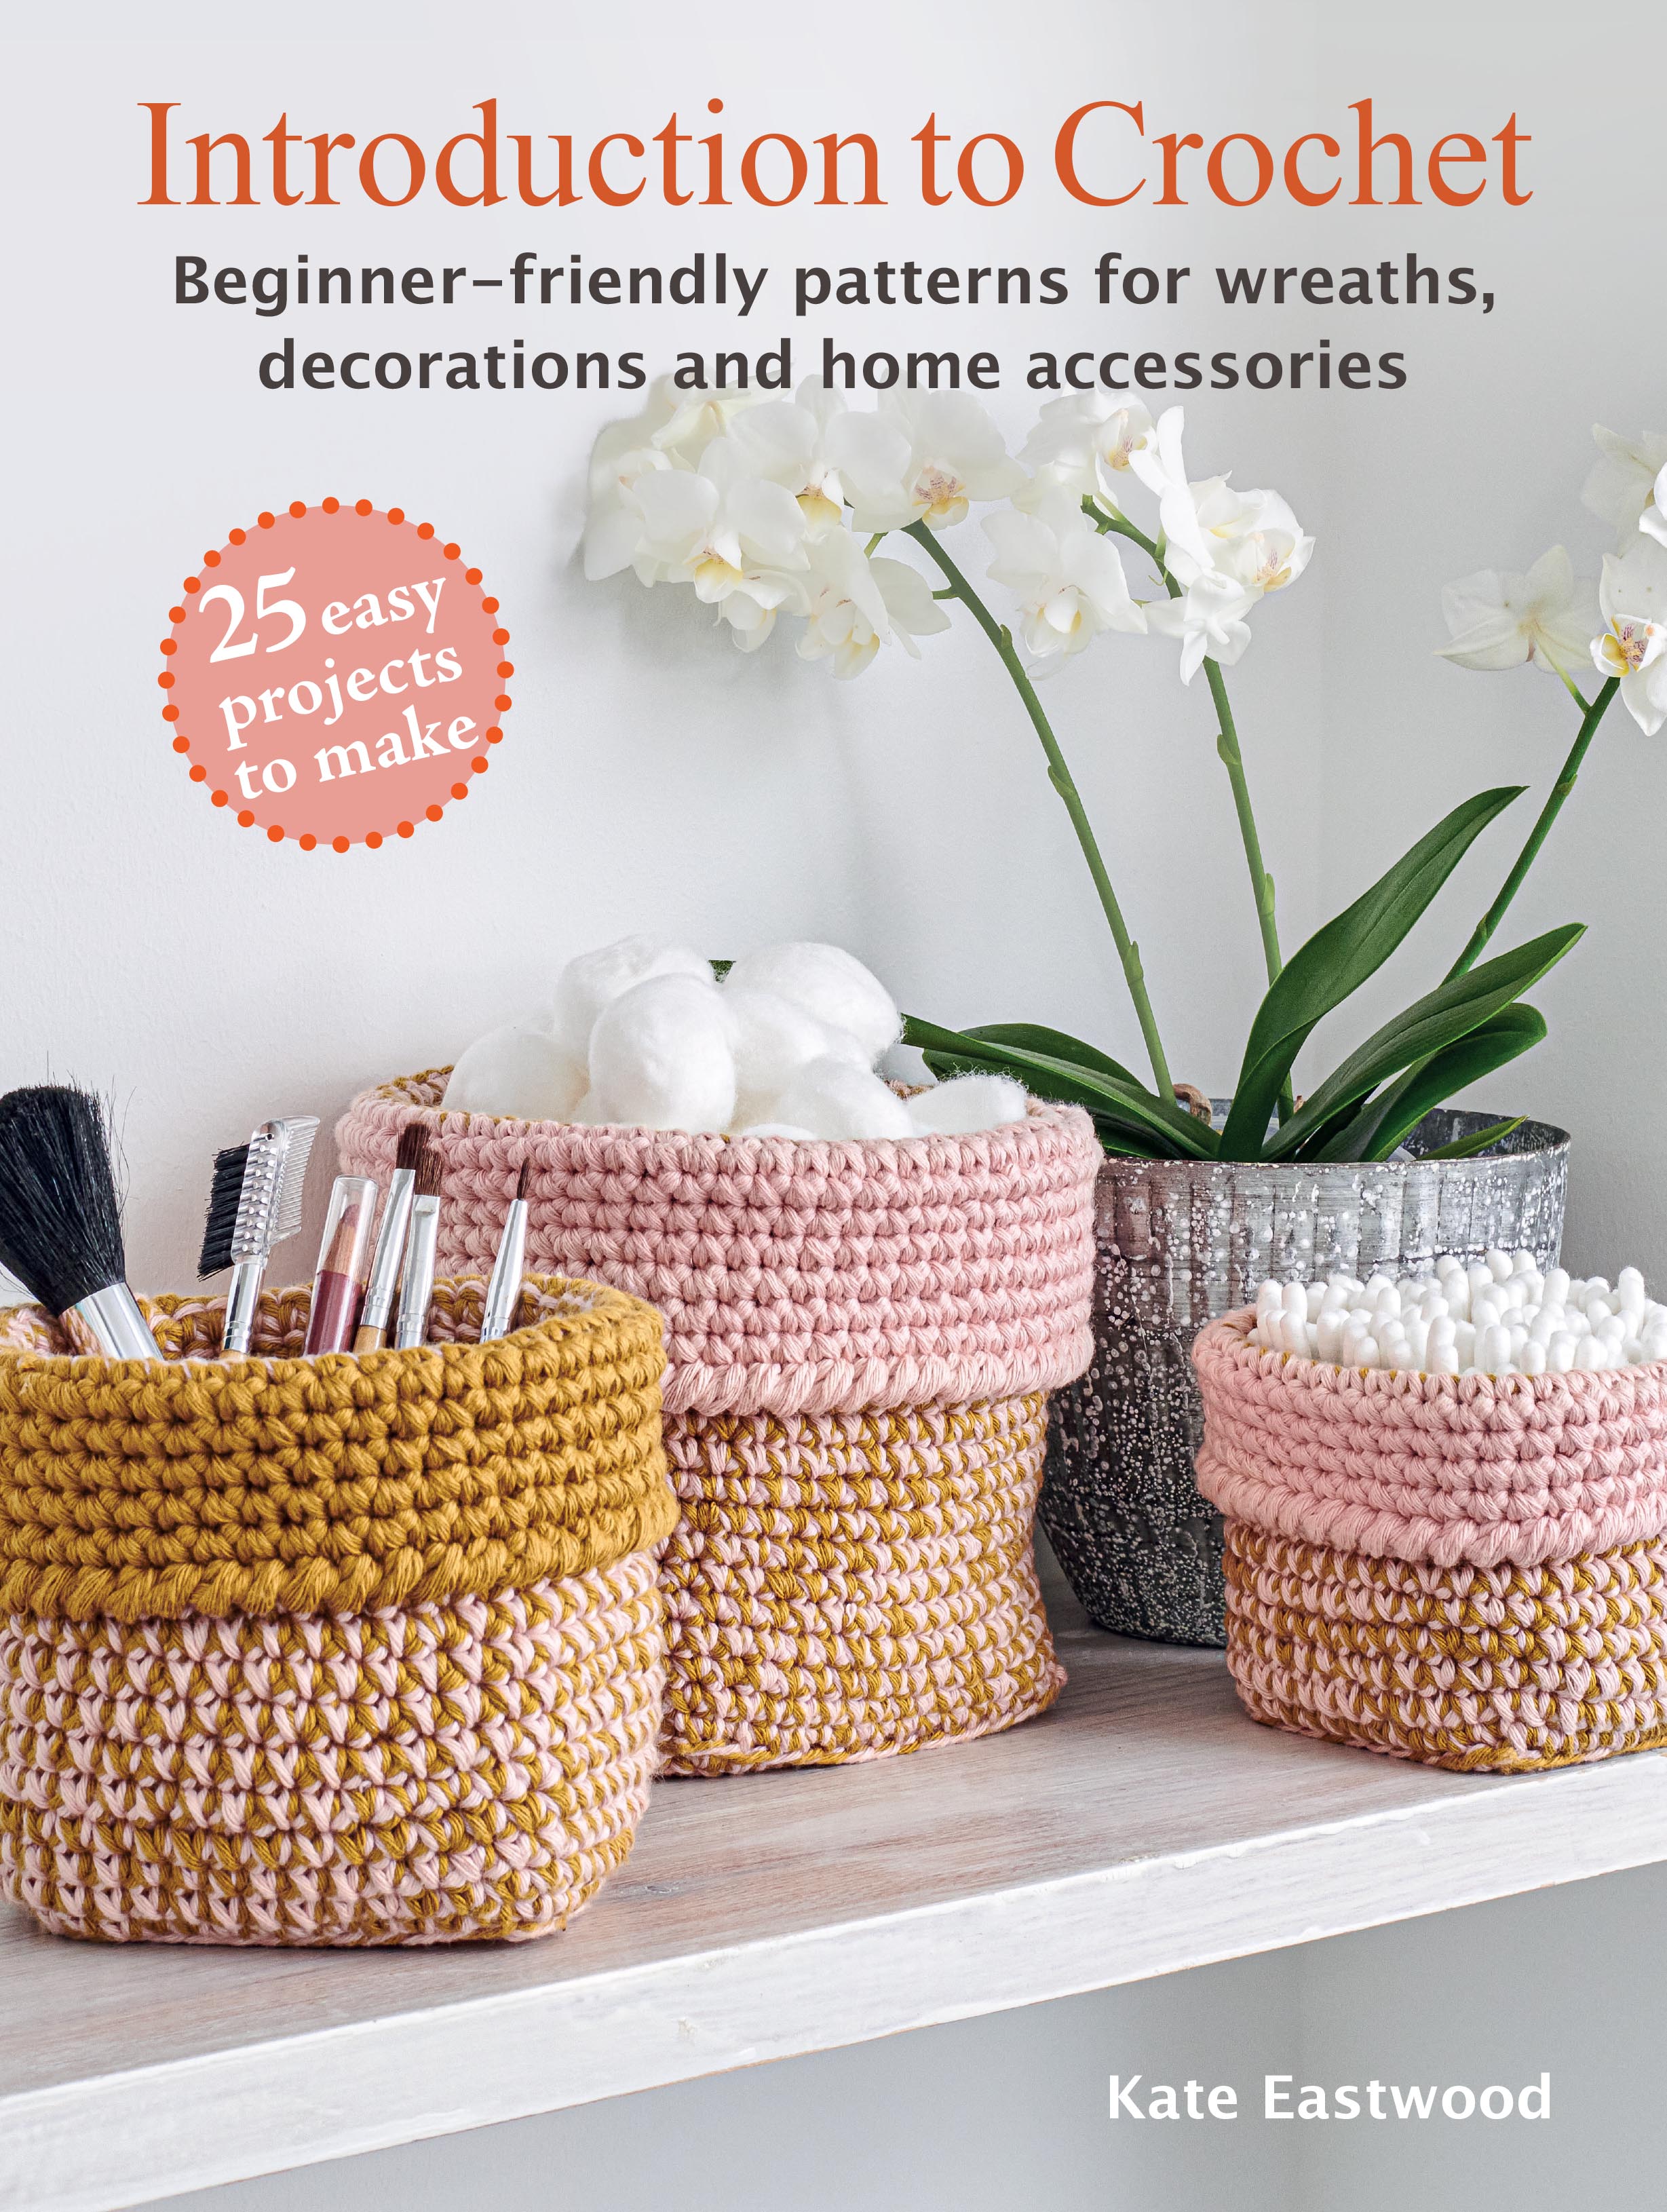 Introduction to Crochet: 25 easy projects to make